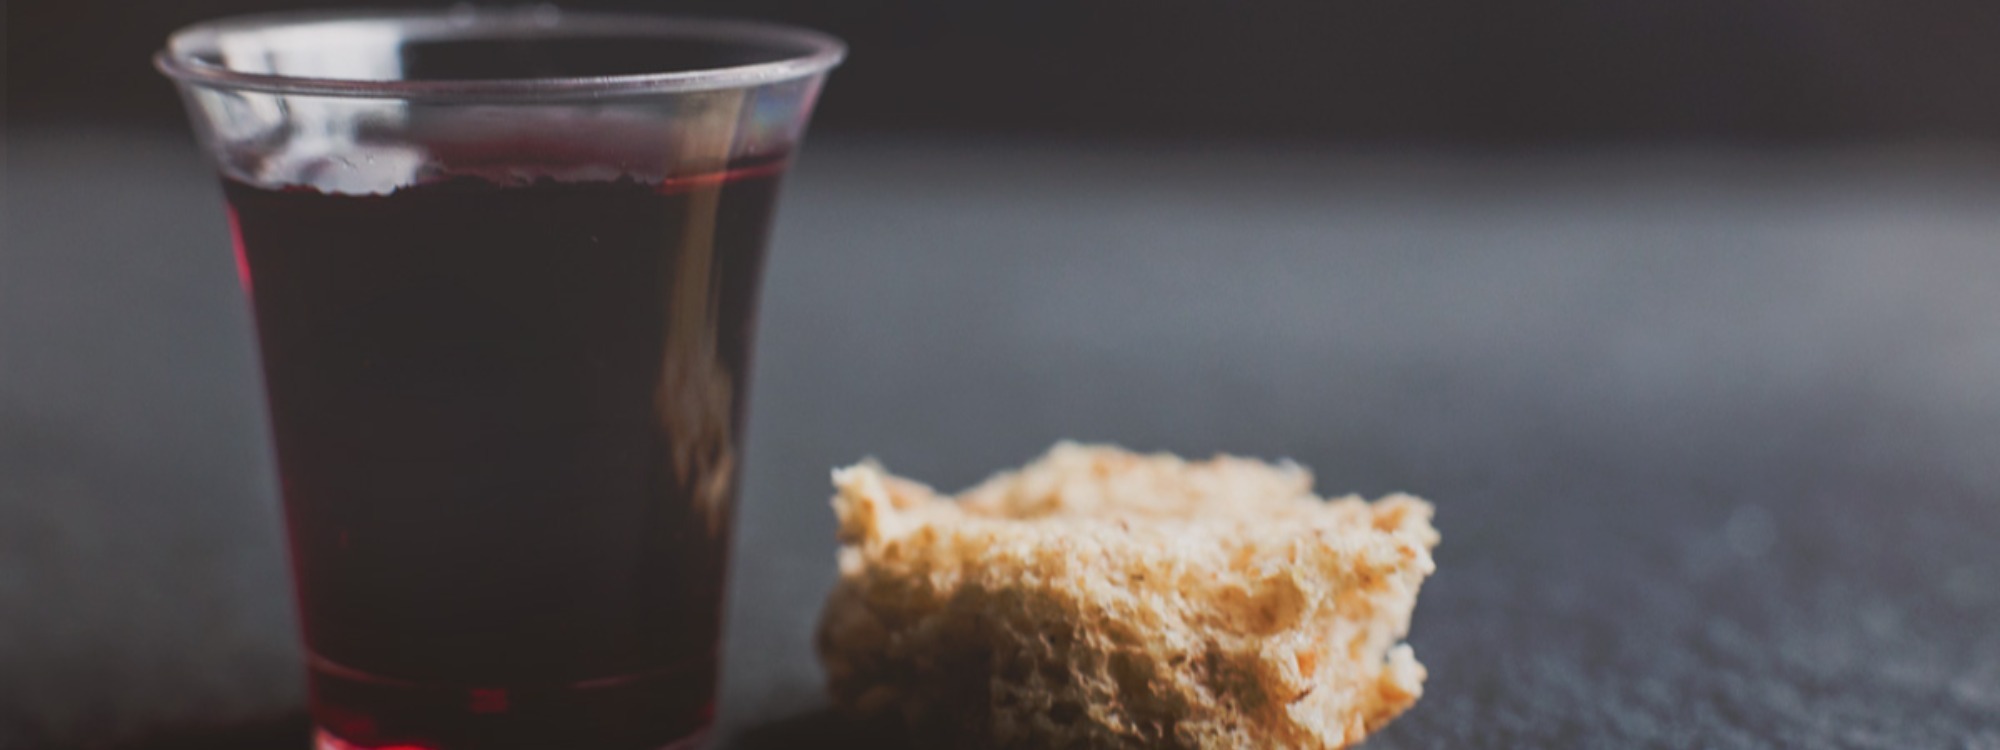 Communion this Sunday morning All Welcome!